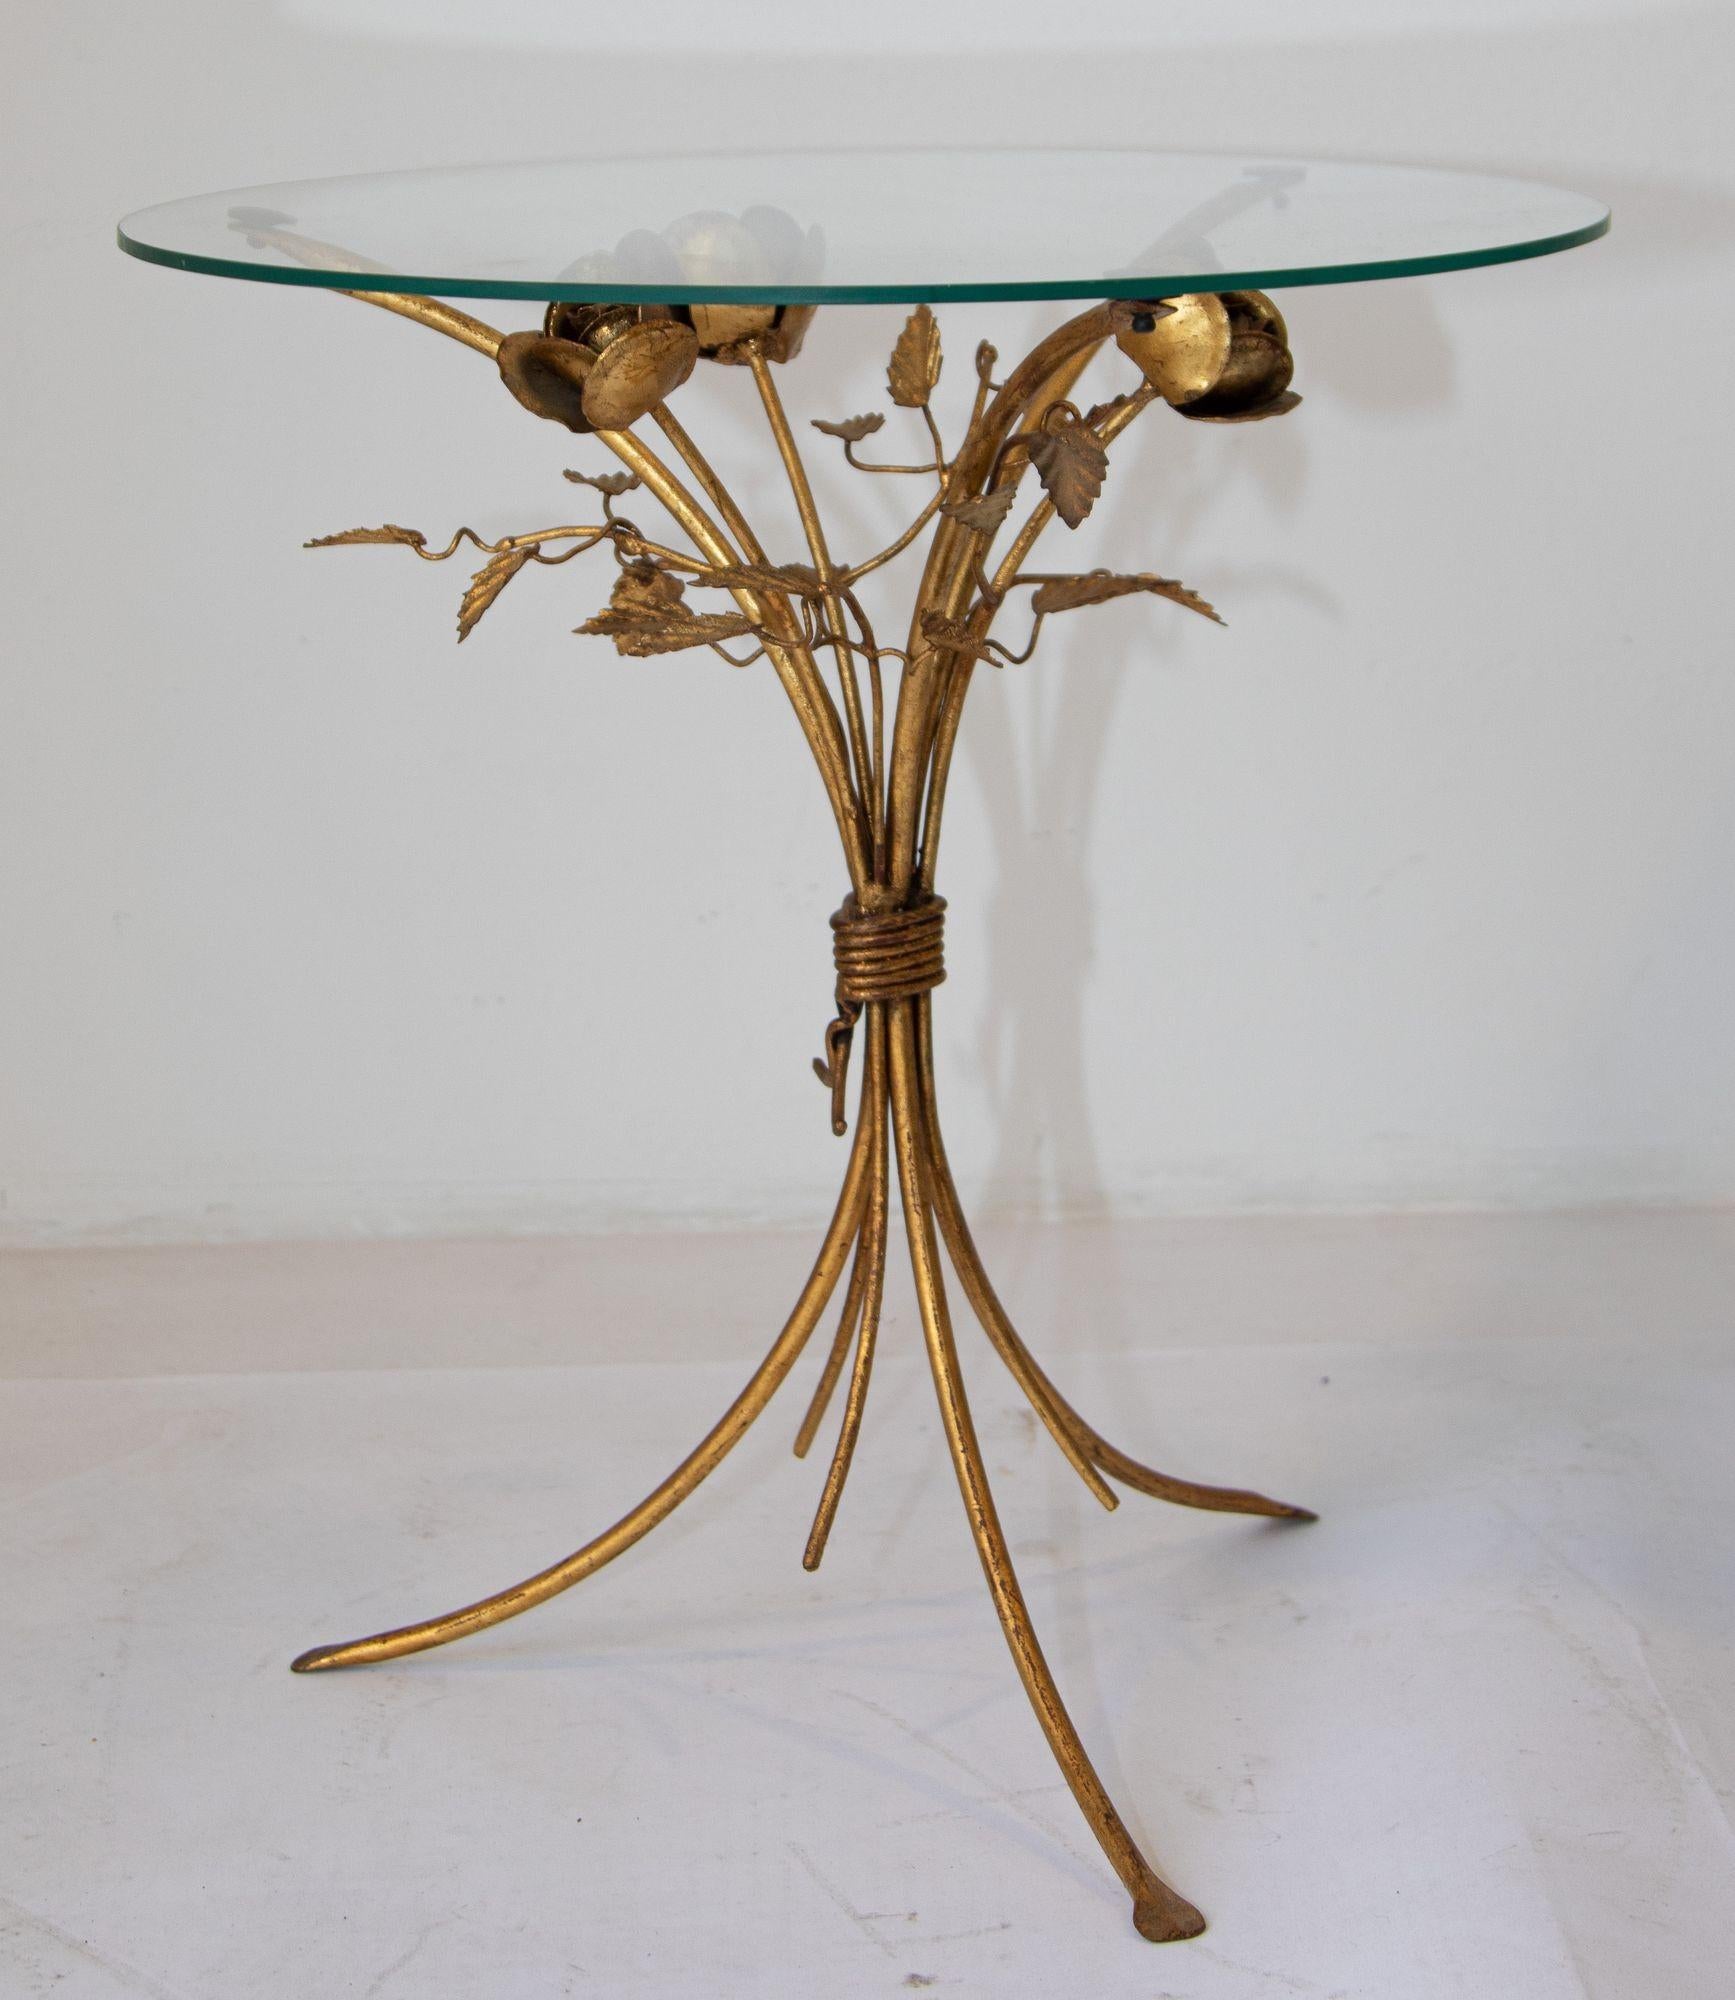 Mid-century Hollywood Regency gilt metal leaf and flower side table by Hans Kögl.
Flower side table on a tripod base with flower details by Hans Kögl.
Mid-century side table with a round glass top seating on a gilt metal tripod base.
Hollywood